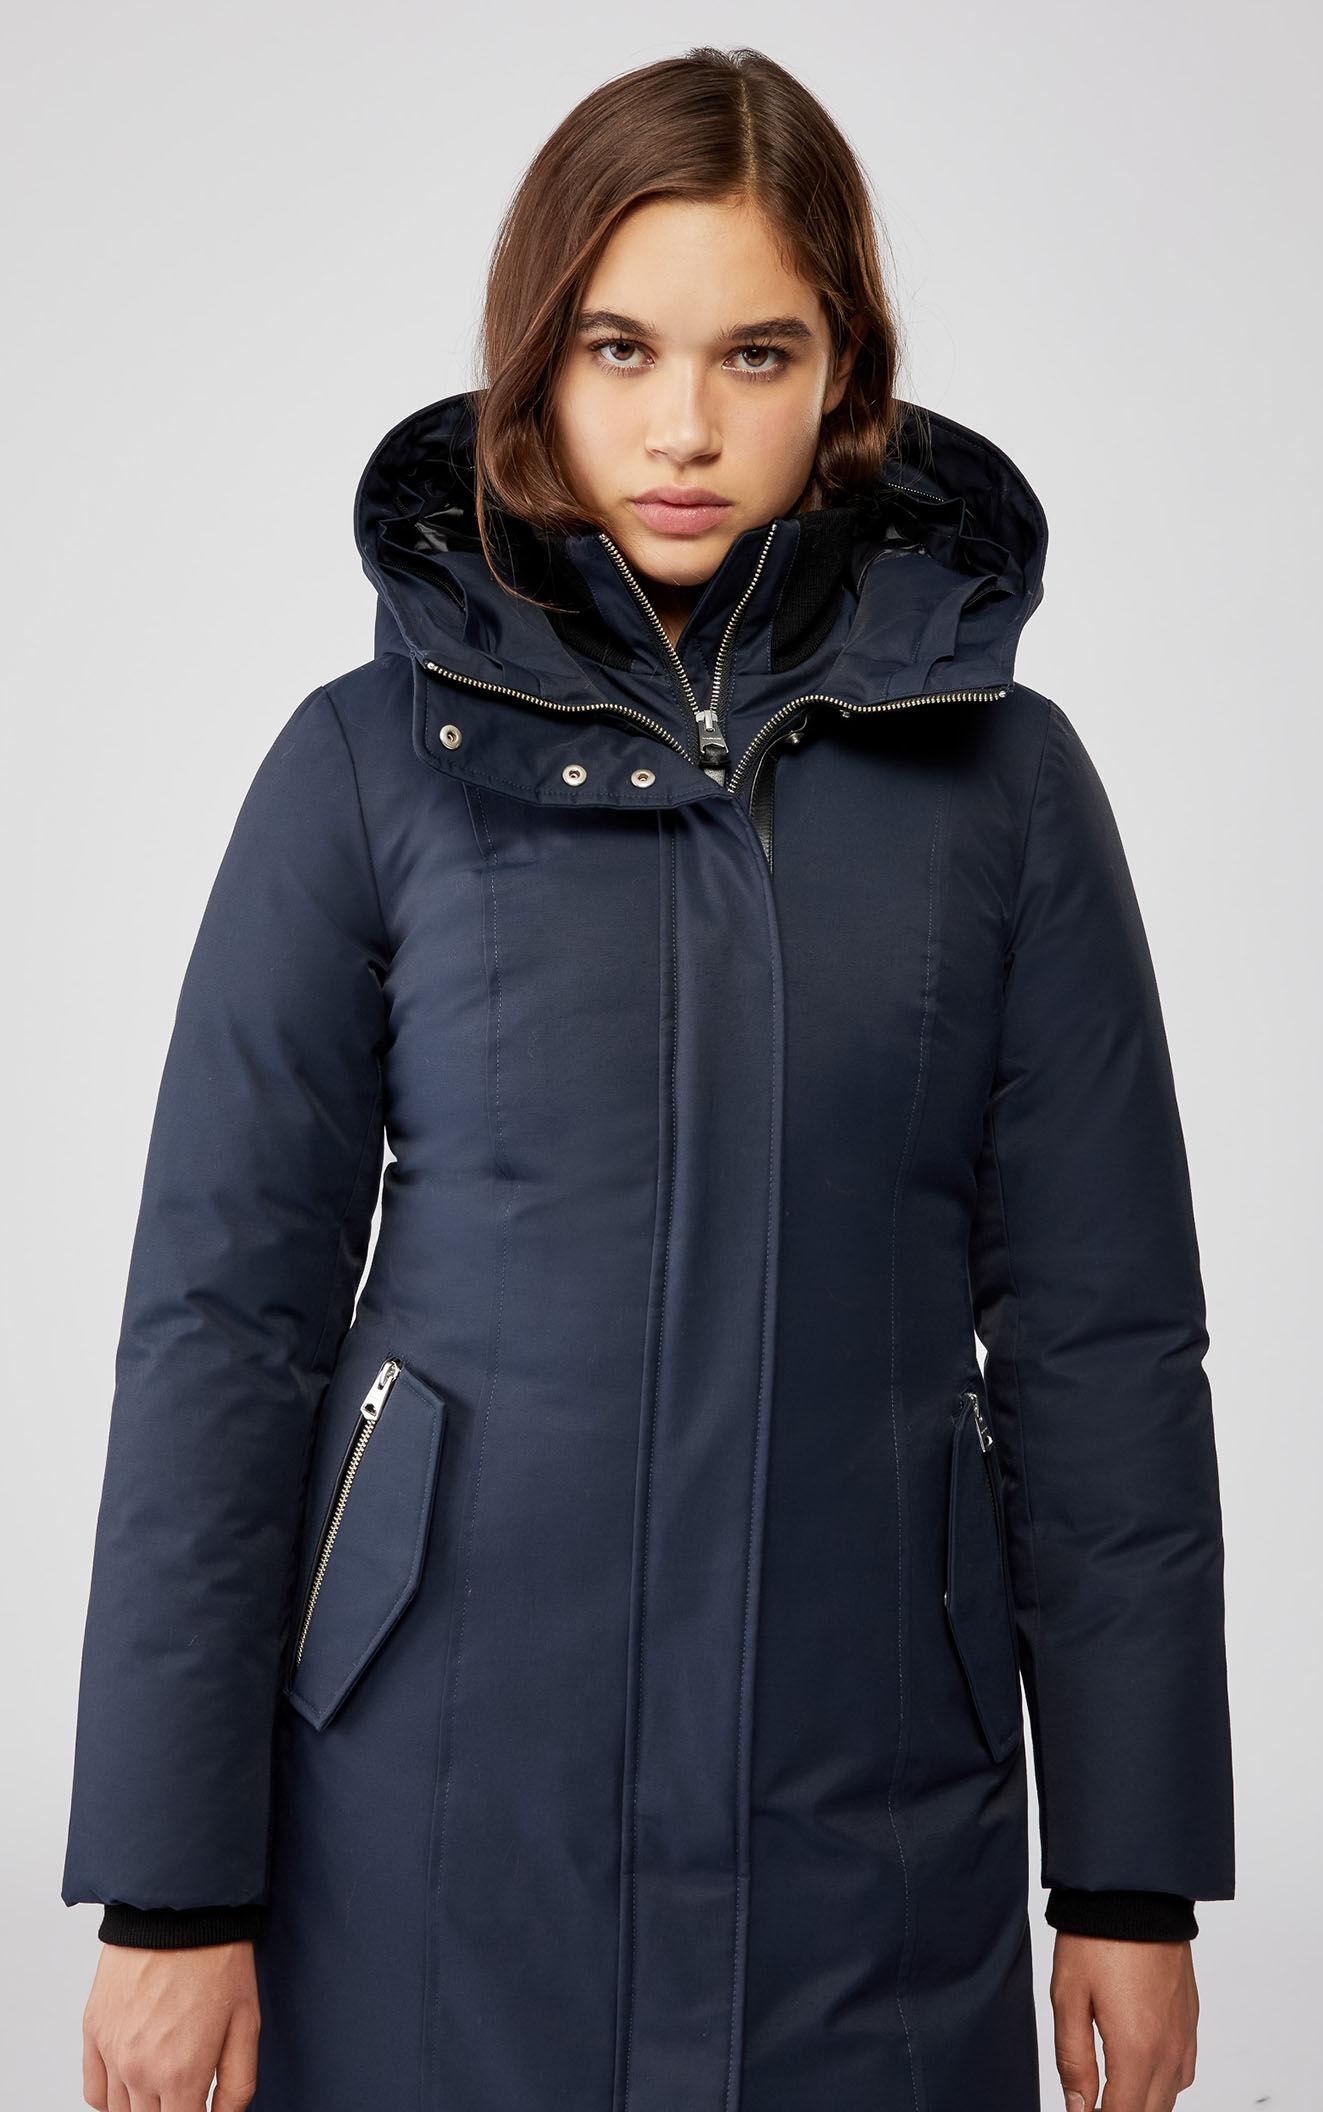 Mackage Harlowe Down Coat With Removable Natural Fur In Navy - Women in ...